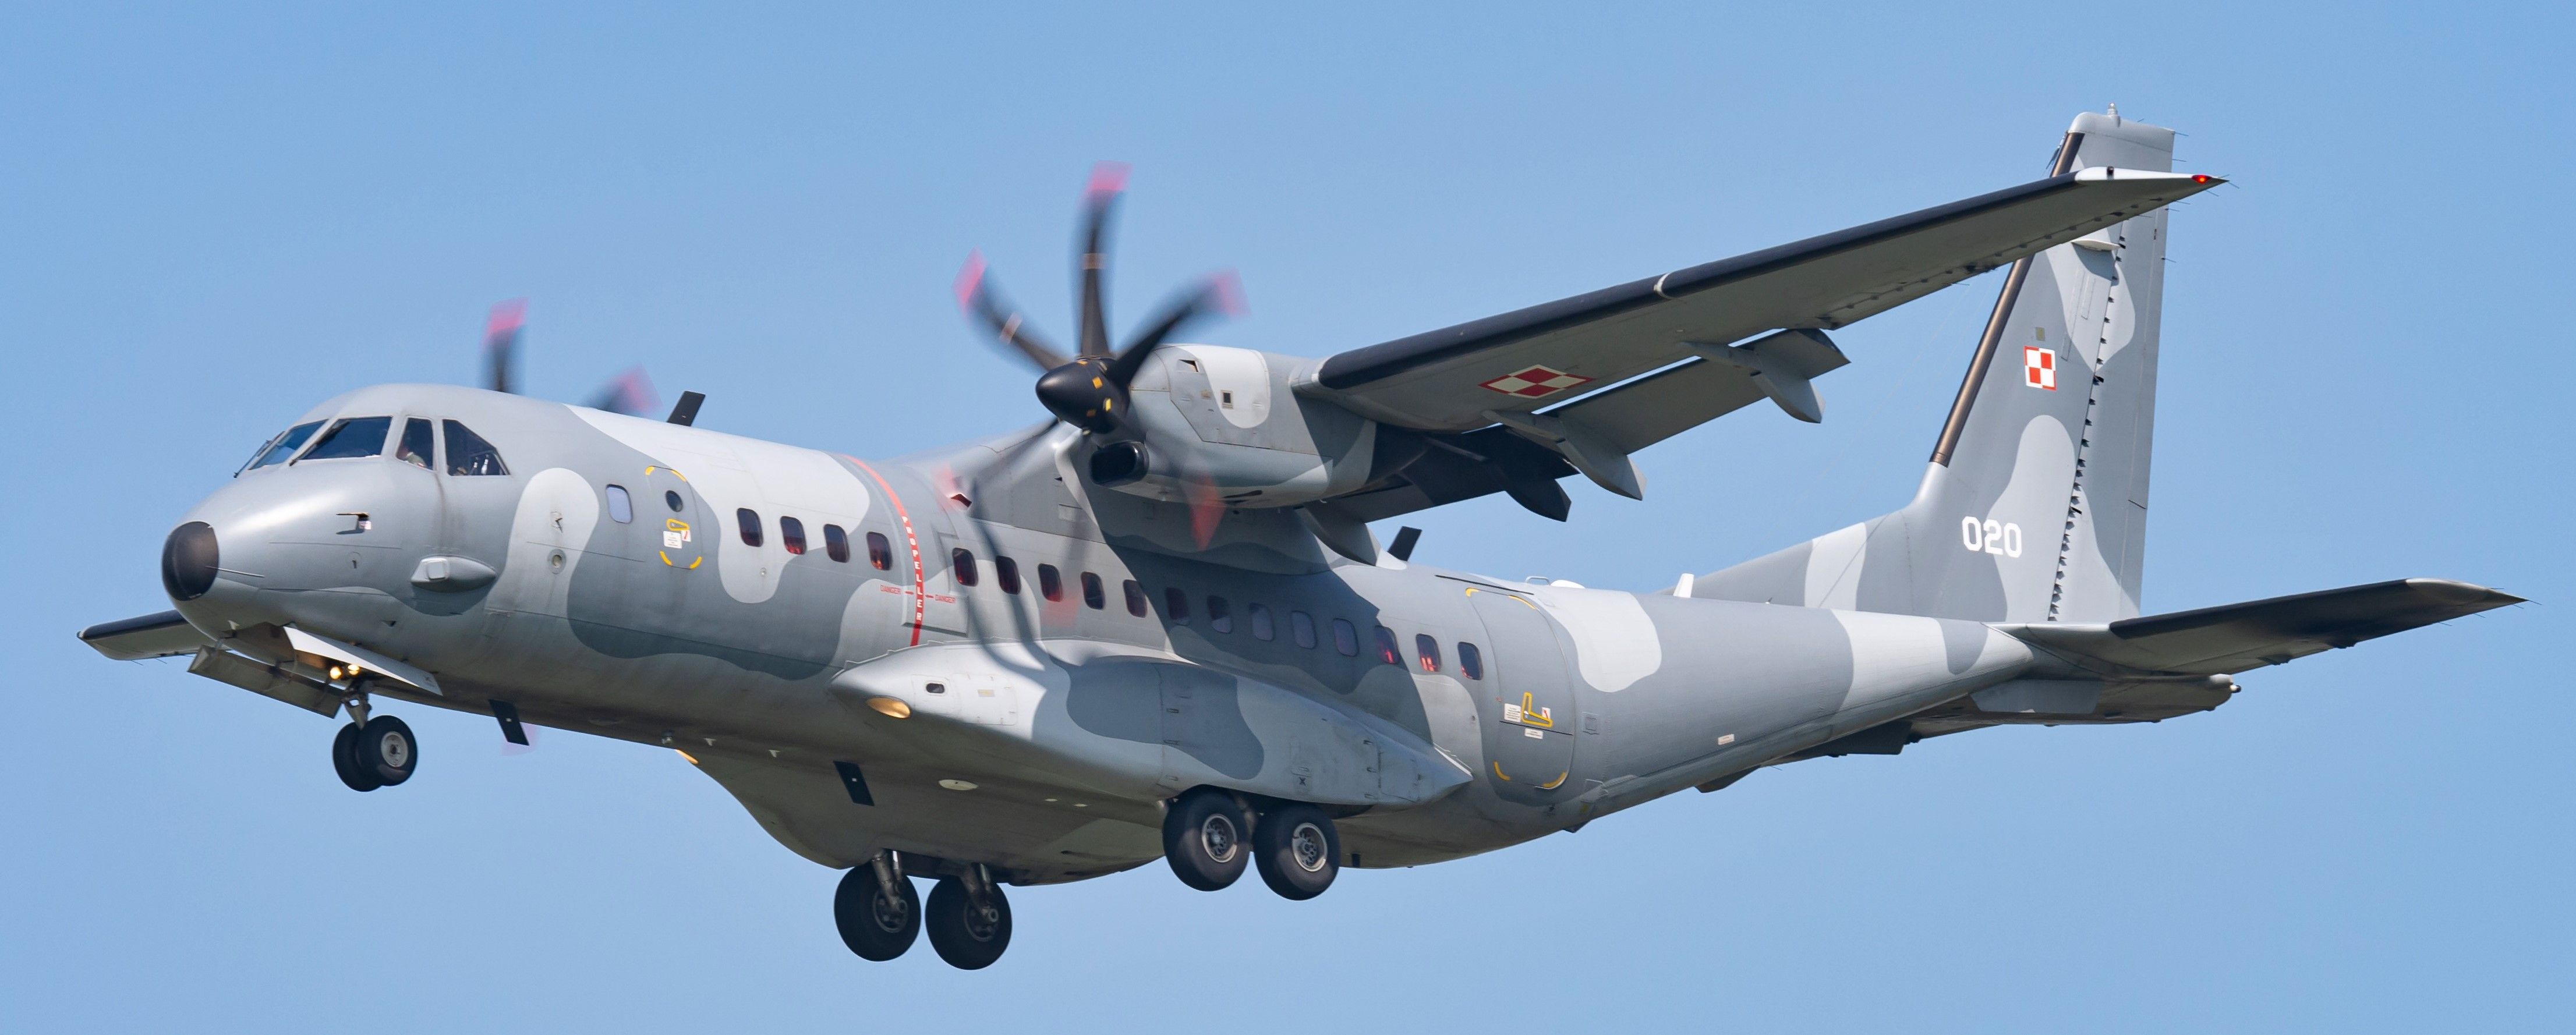 Airbus demonstrates C295 FITS mission system operated by ground-based crews